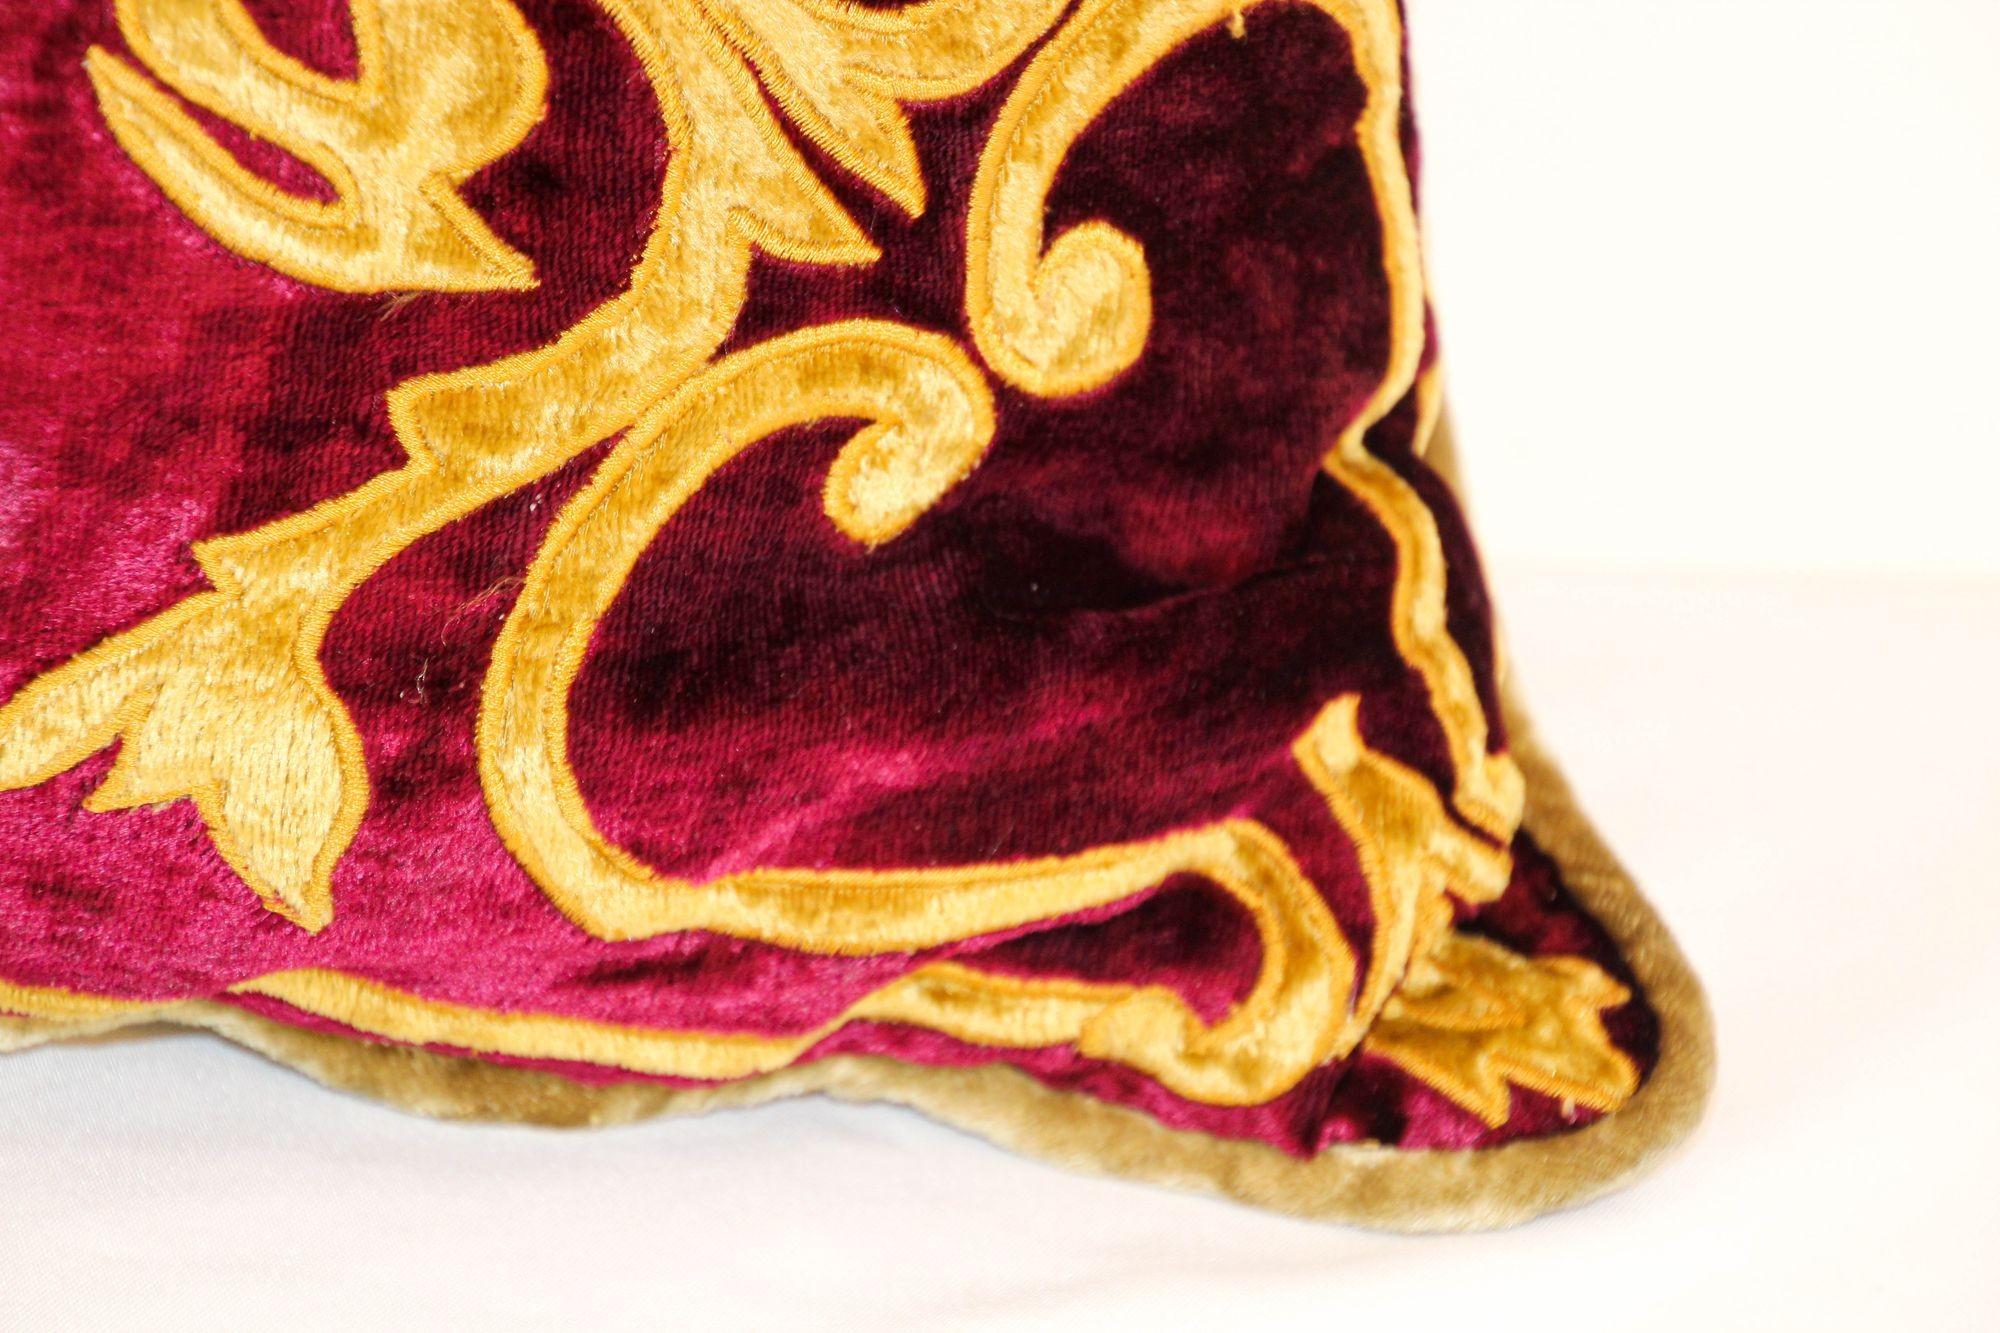 Venetian Baroque Red and Gold Velvet Pillows with Elaborate Applique Work a Pair For Sale 2